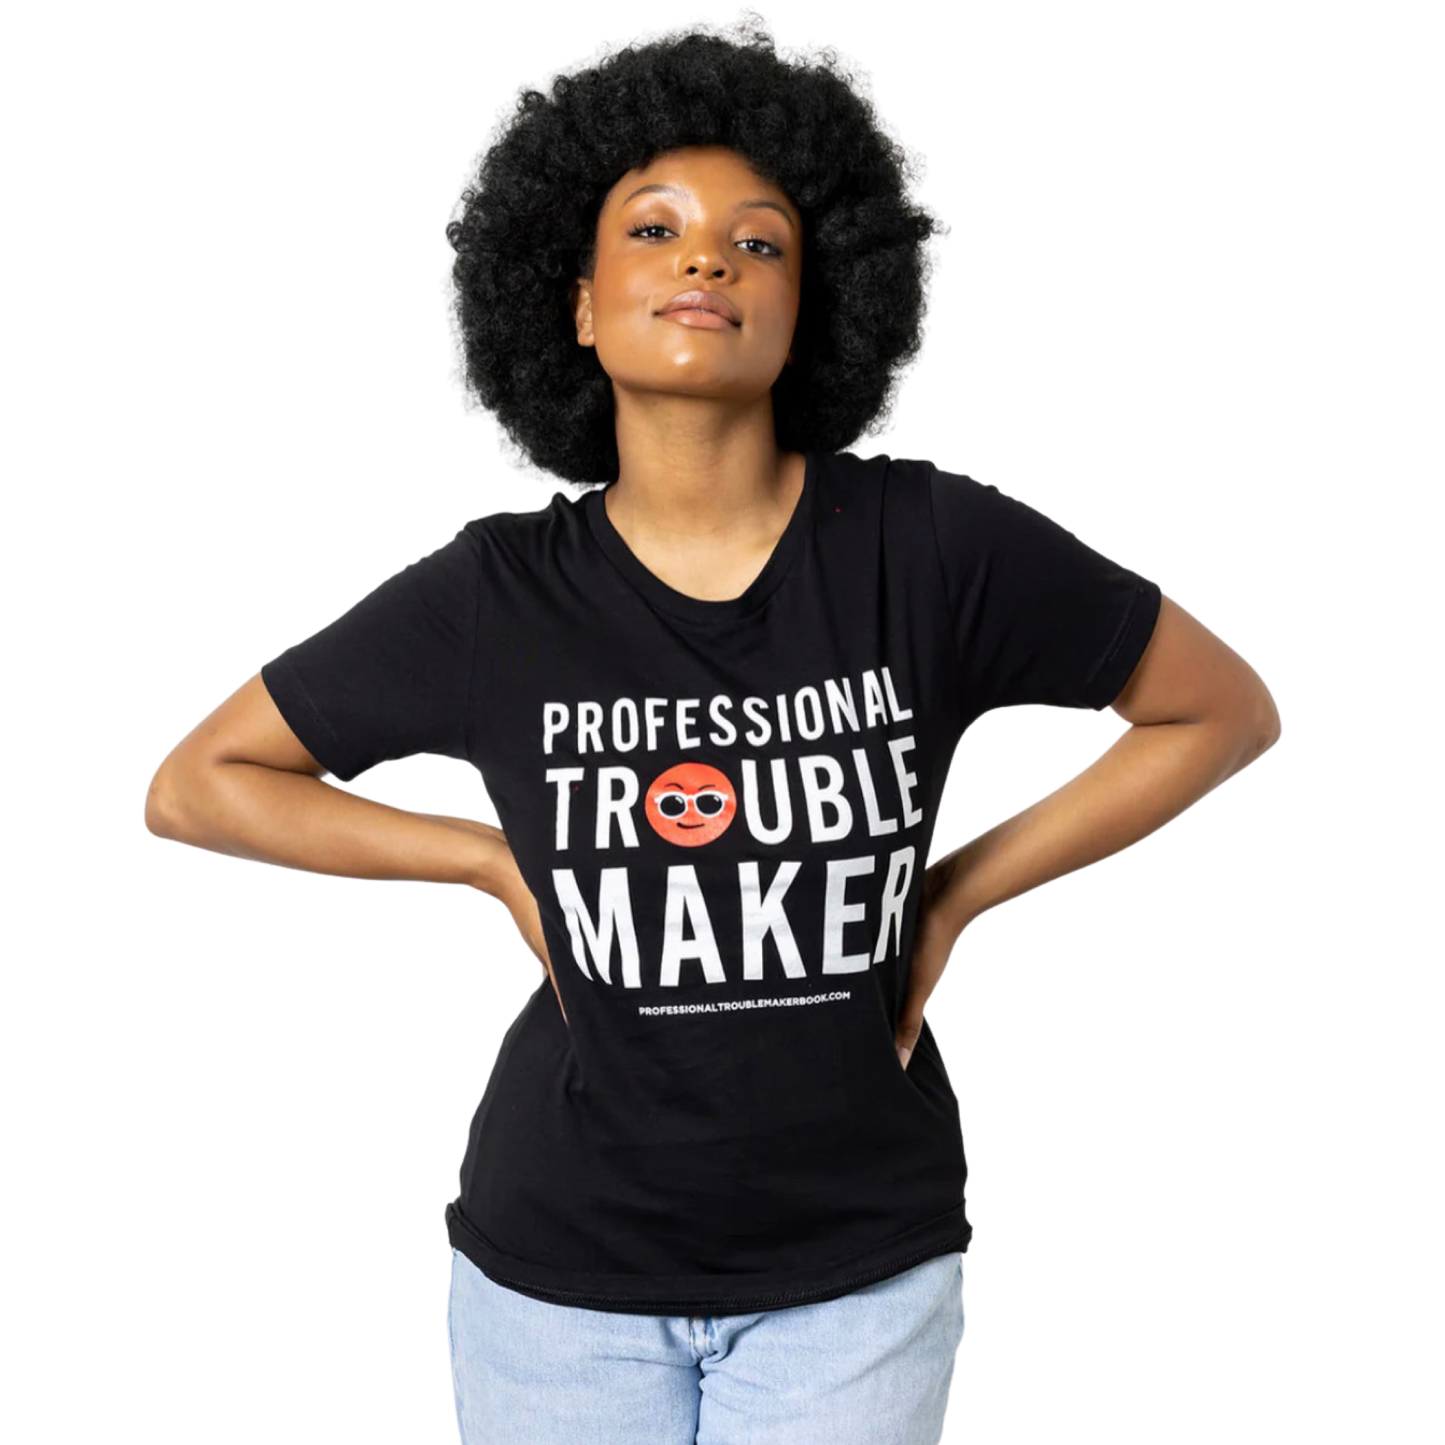 Professional Troublemaker T-Shirt